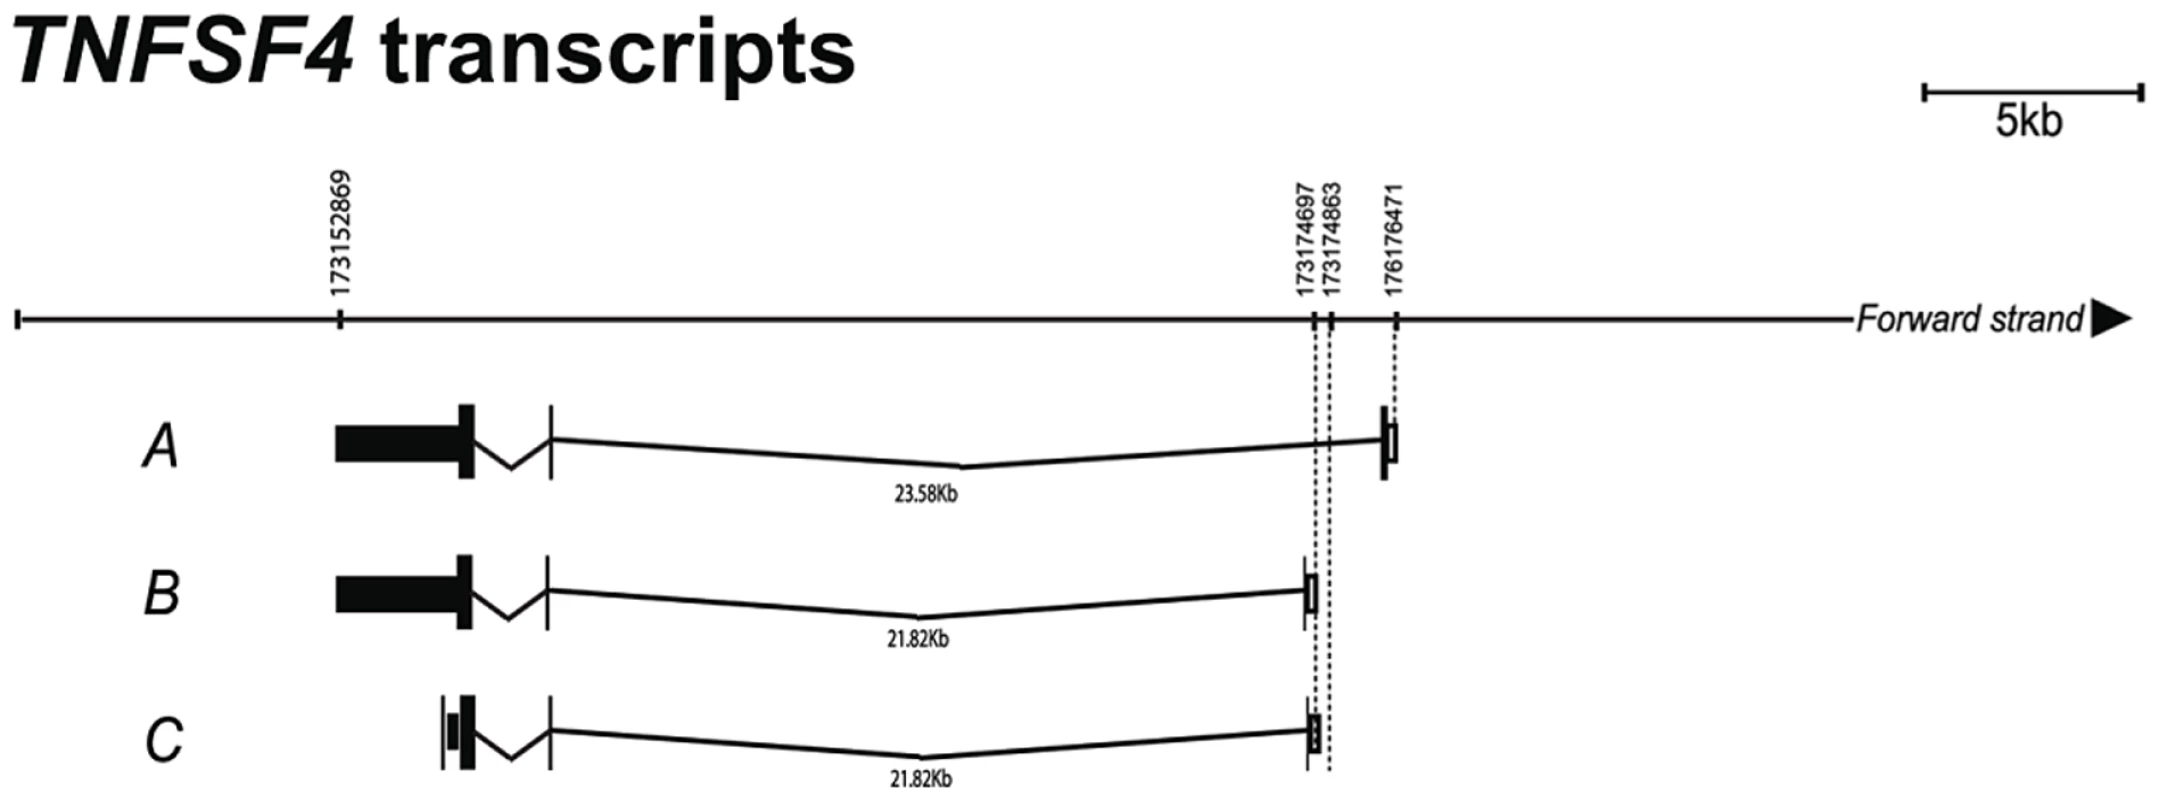 Confirmation of <i>TNFSF4</i> start site and splice variants.